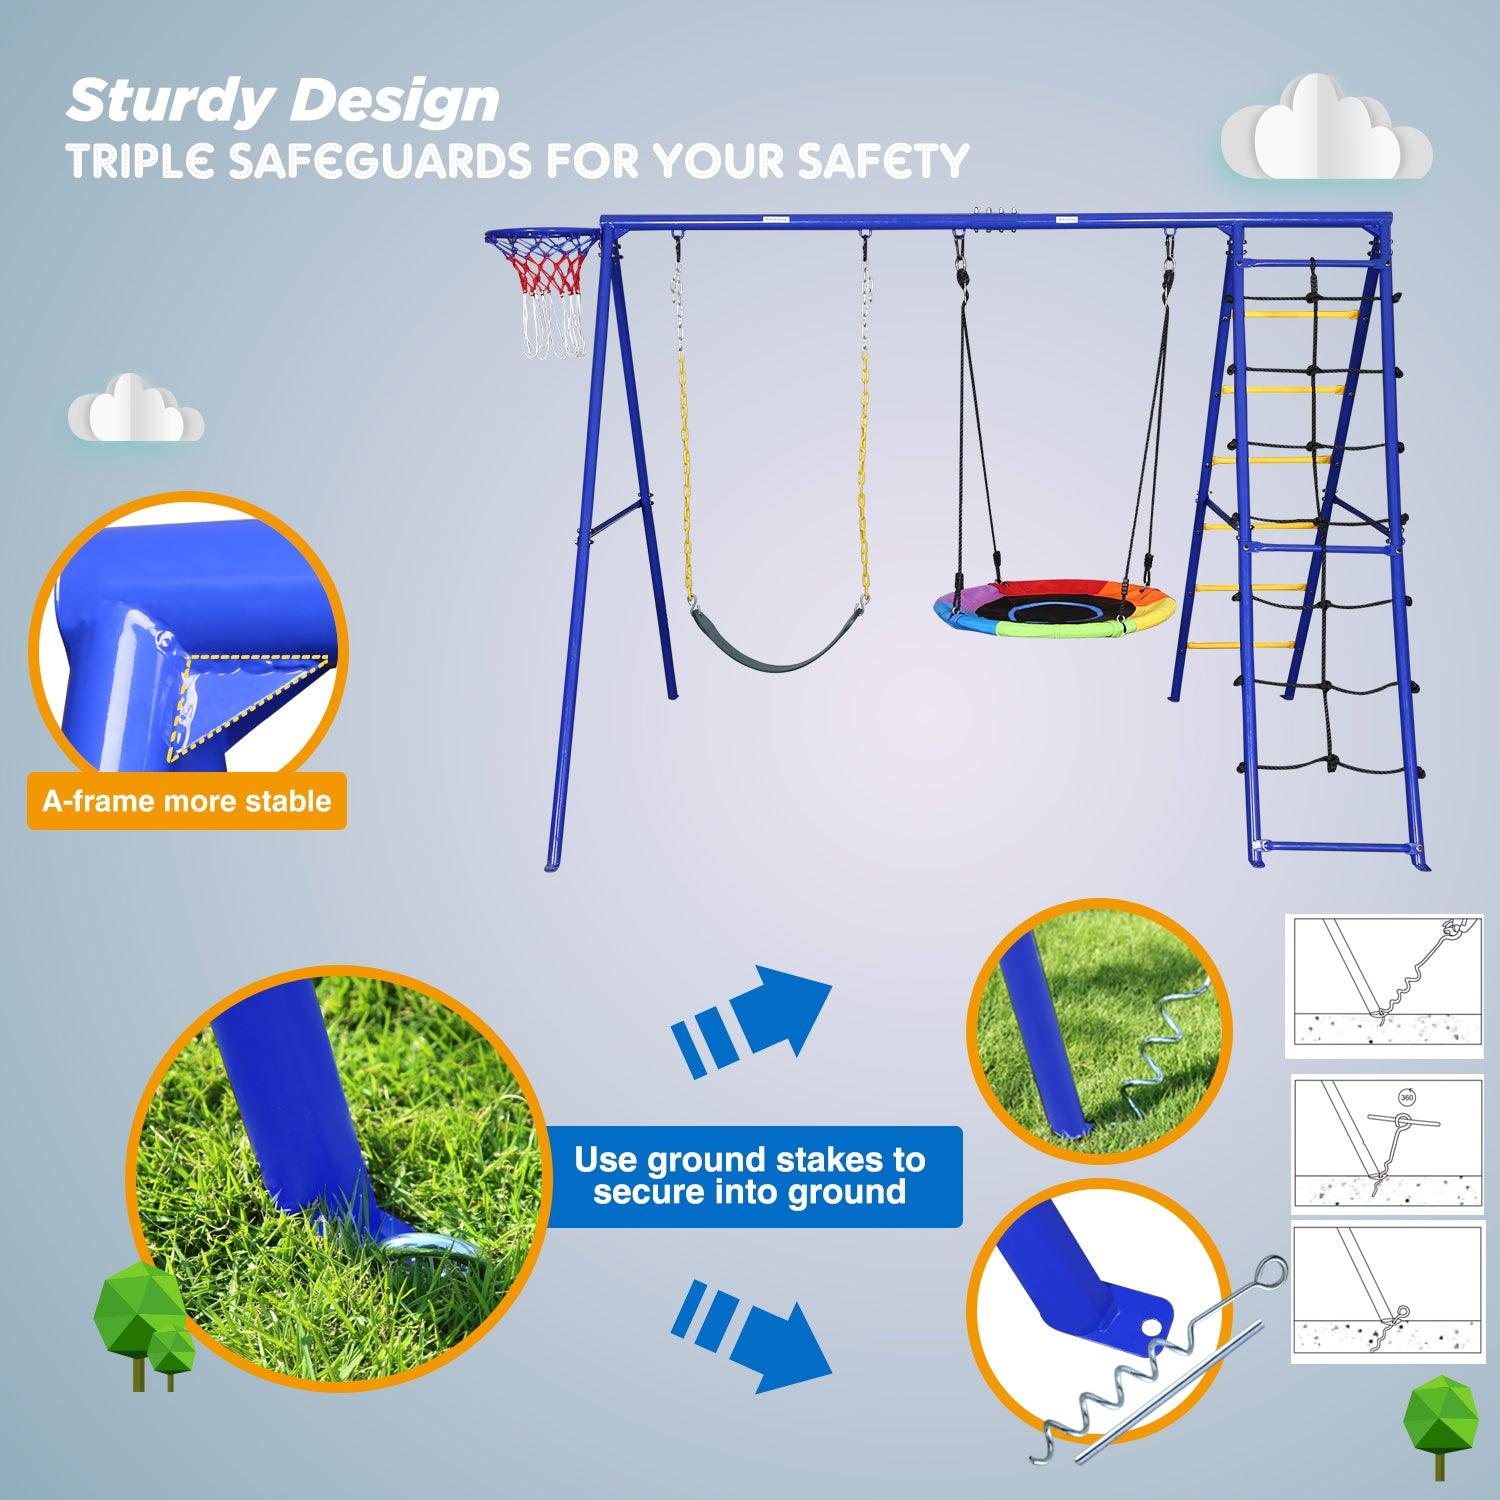 outdoor swing sets